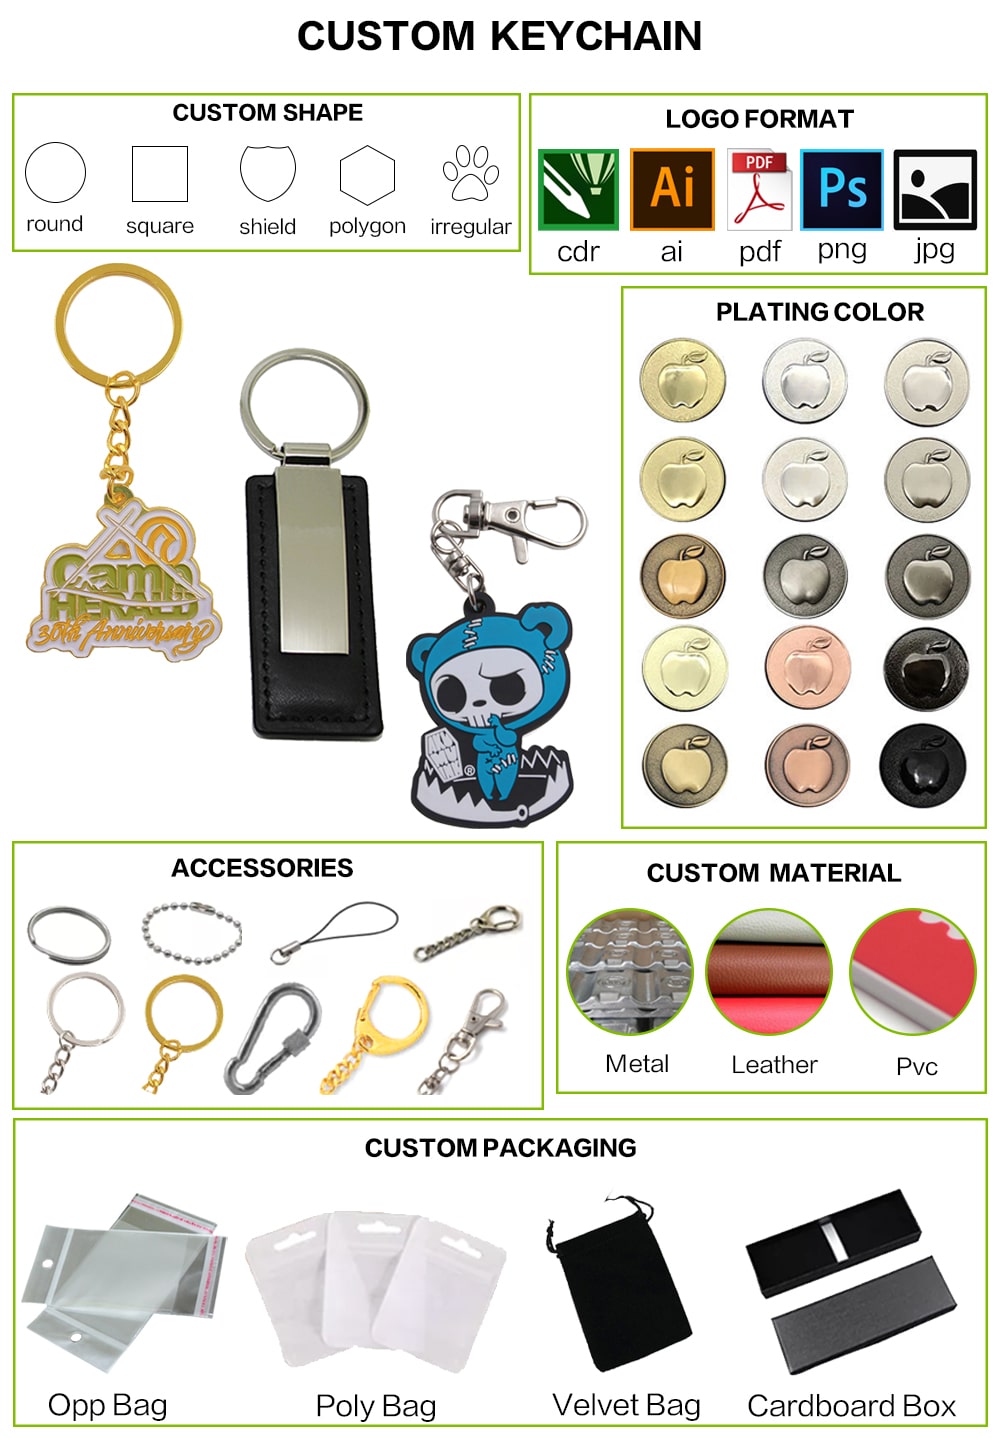 Customize your own logo leather keychain